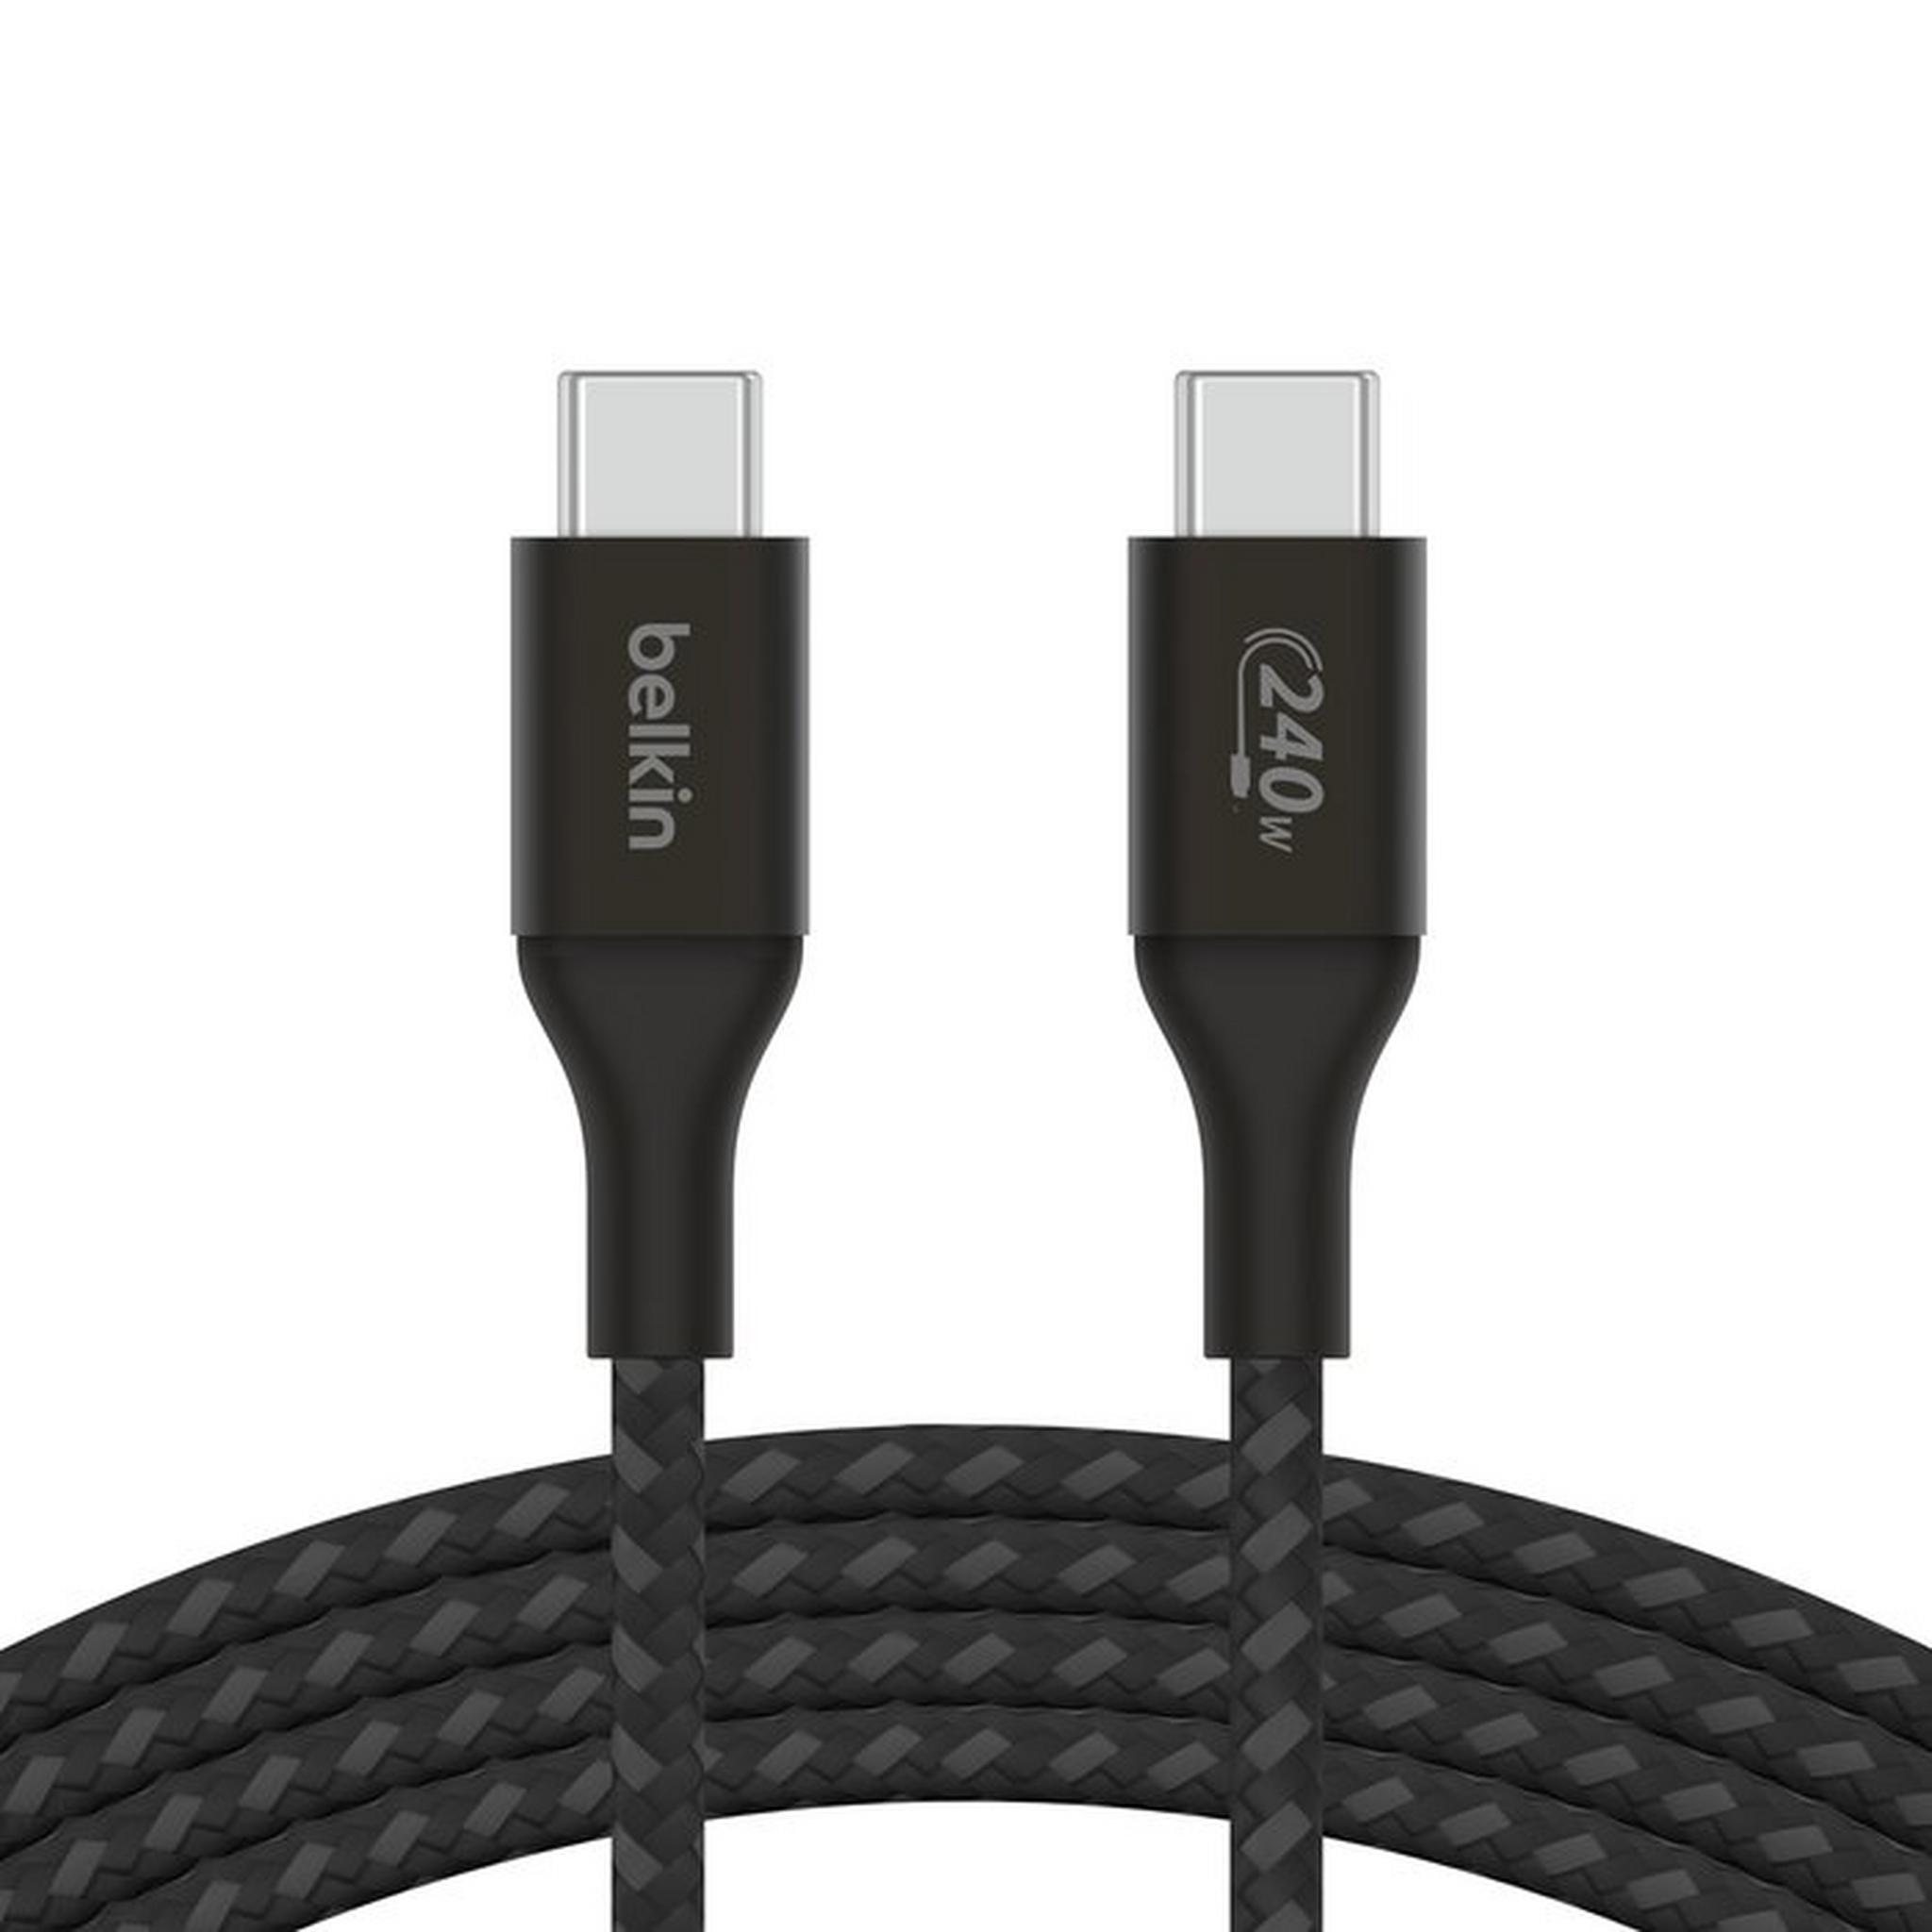 Belkin USB-C to C Braided Cable, 240W, 1M, CAB015BT1MBK – Black